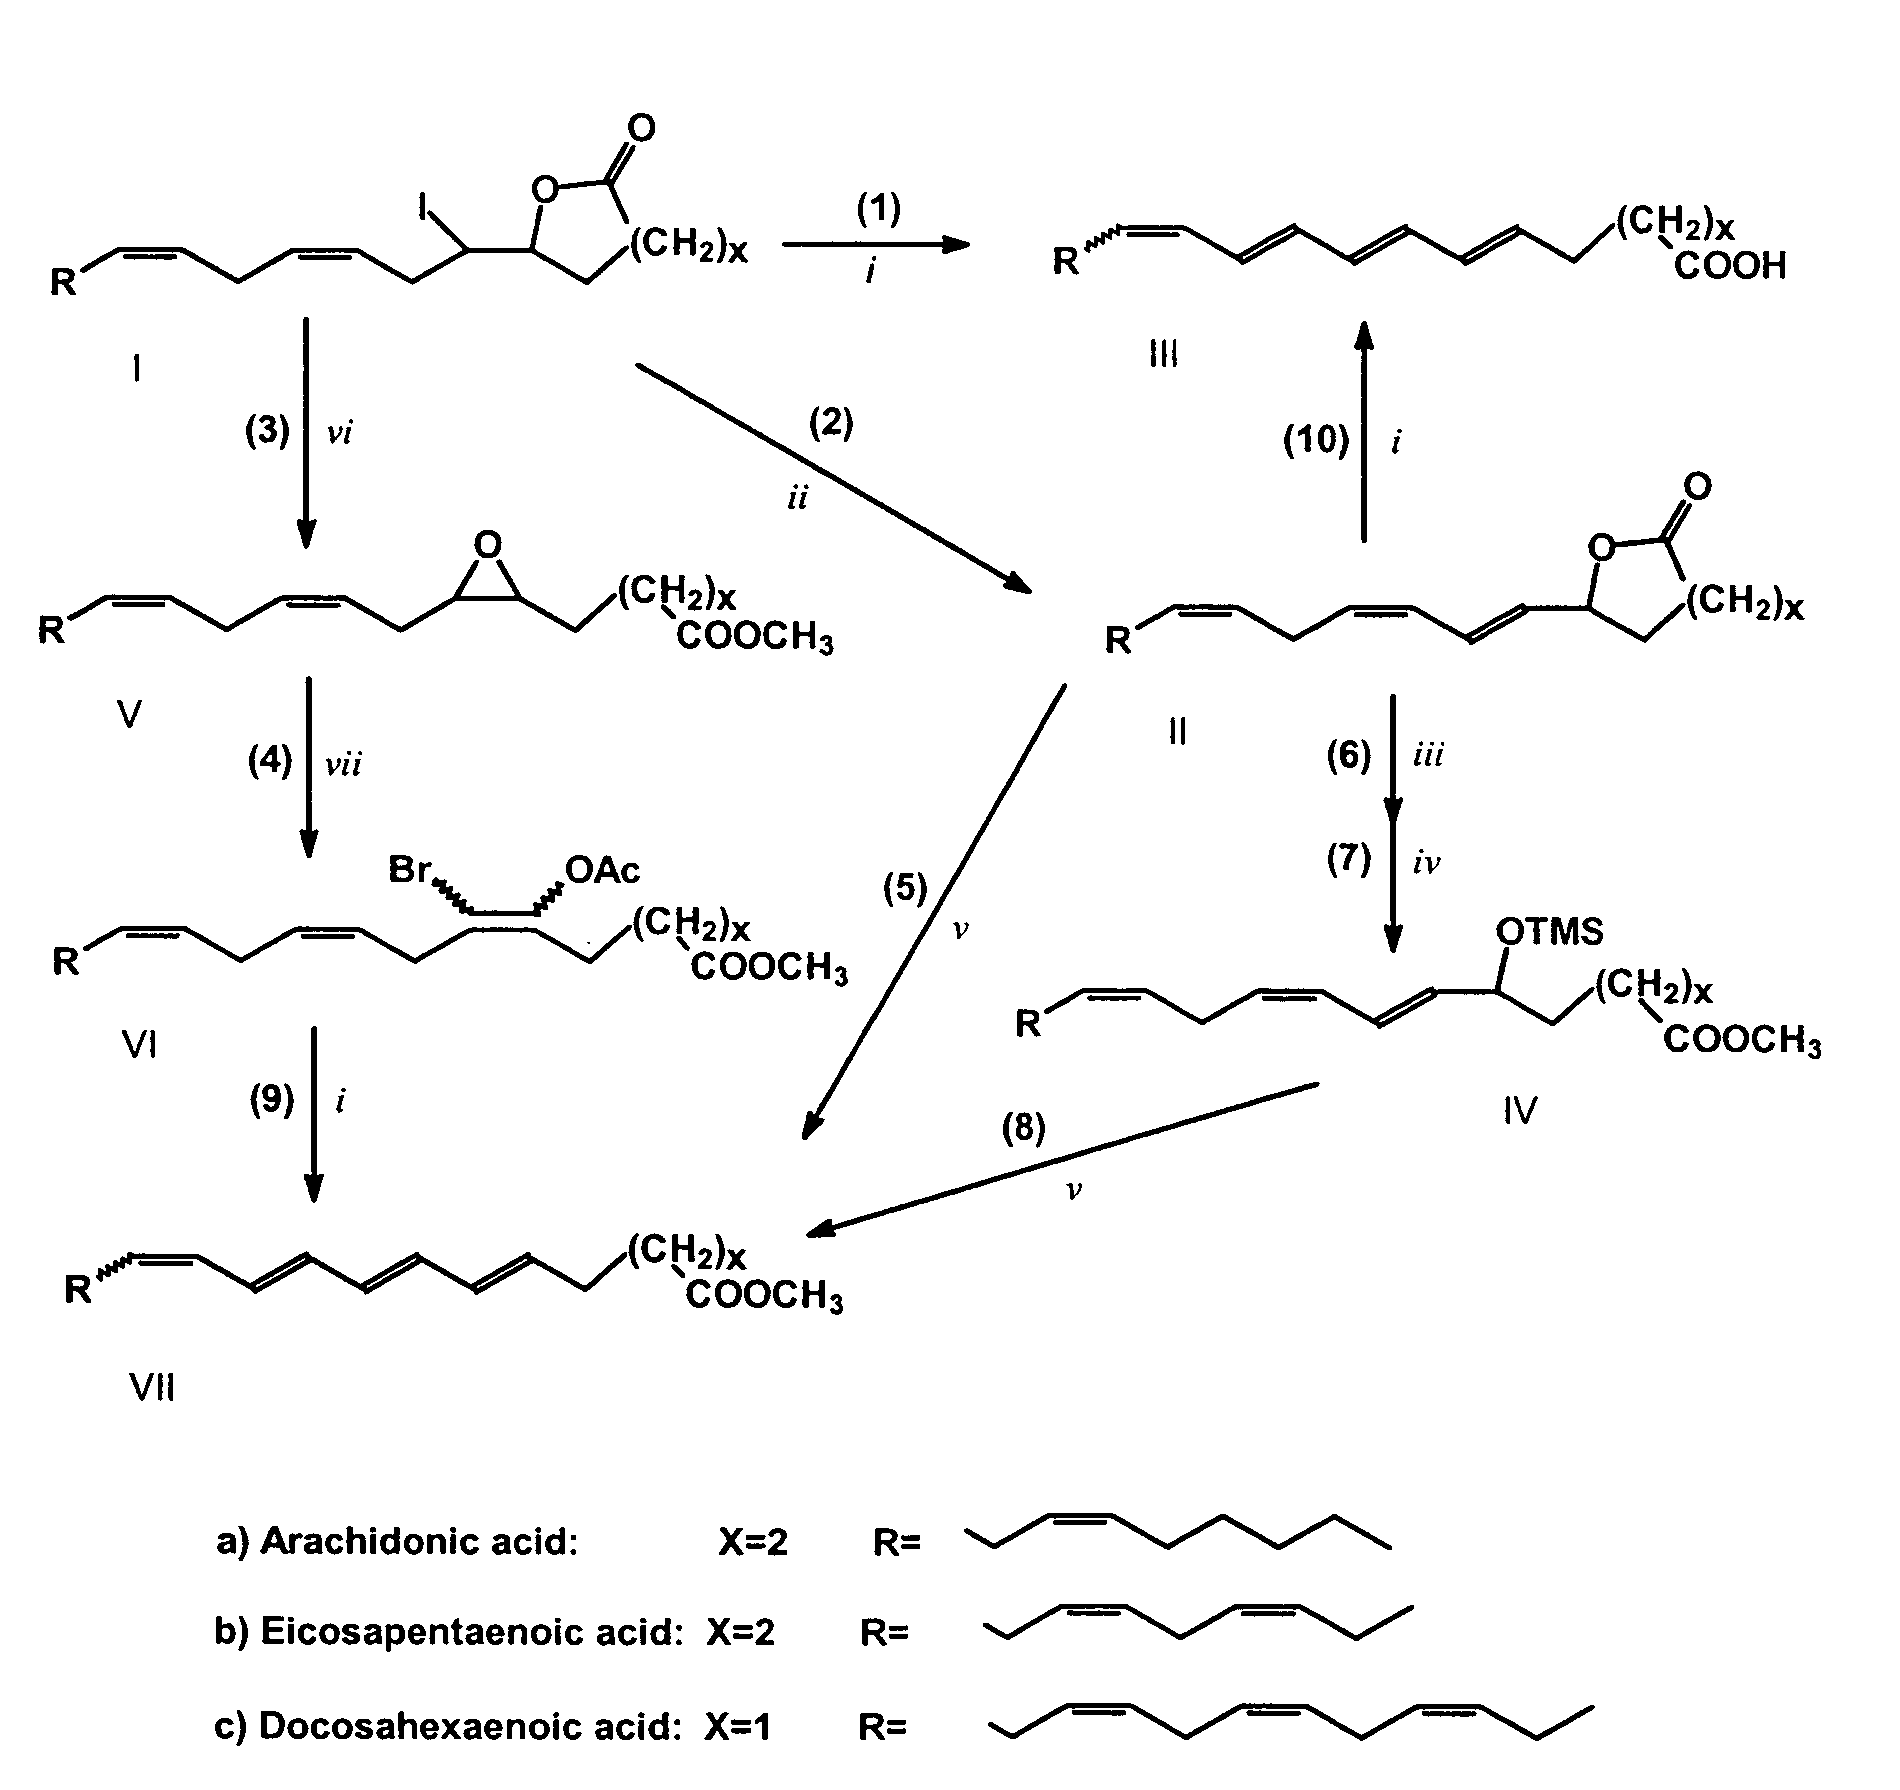 Synthesis of polyconjugated fatty acids